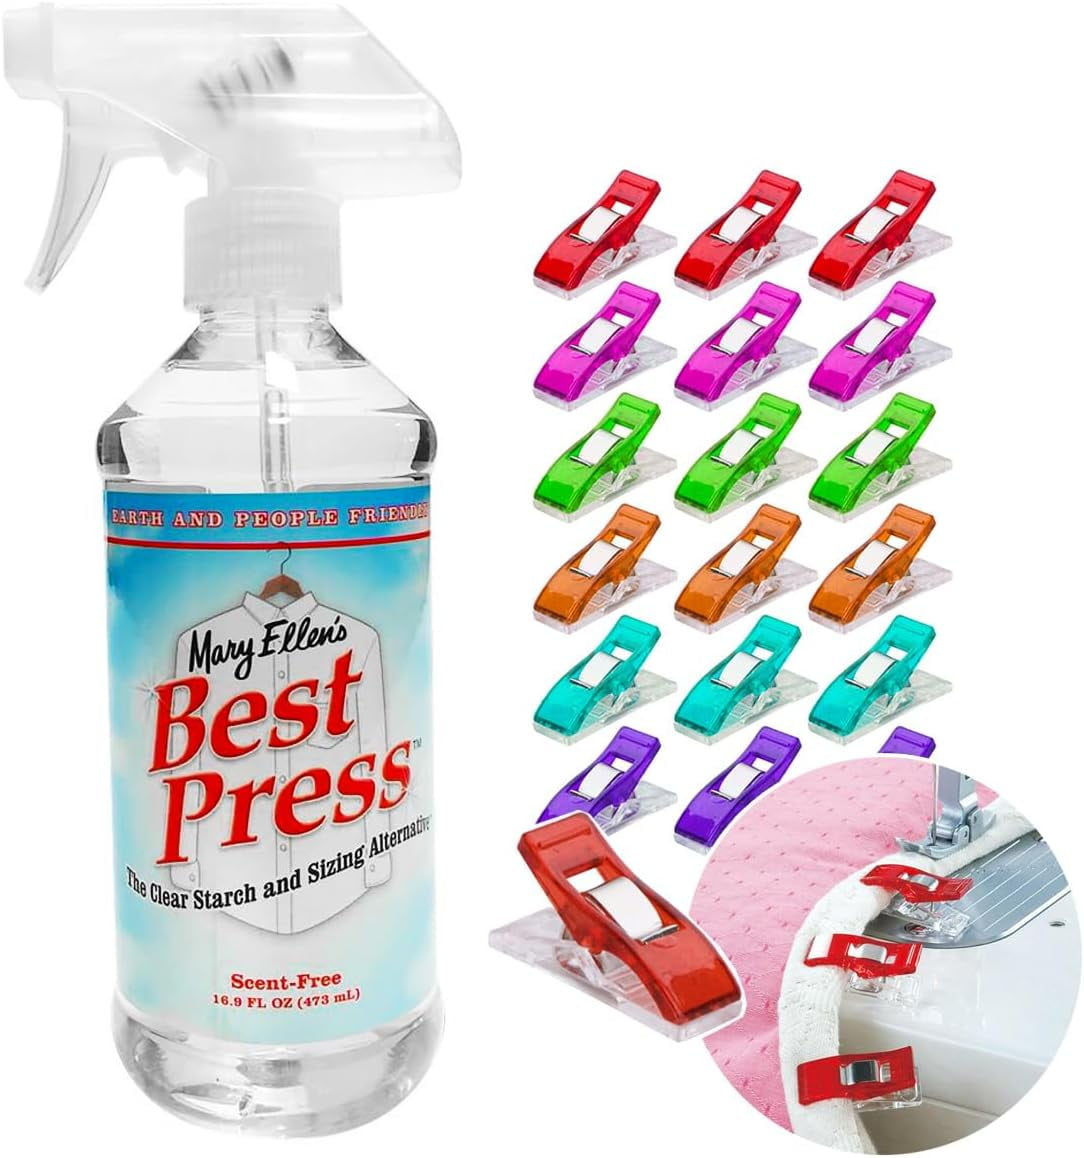 Mary Ellen's Best Press Starch Spray for Ironing, 20 Sewing Clips, Size: 16.9 oz